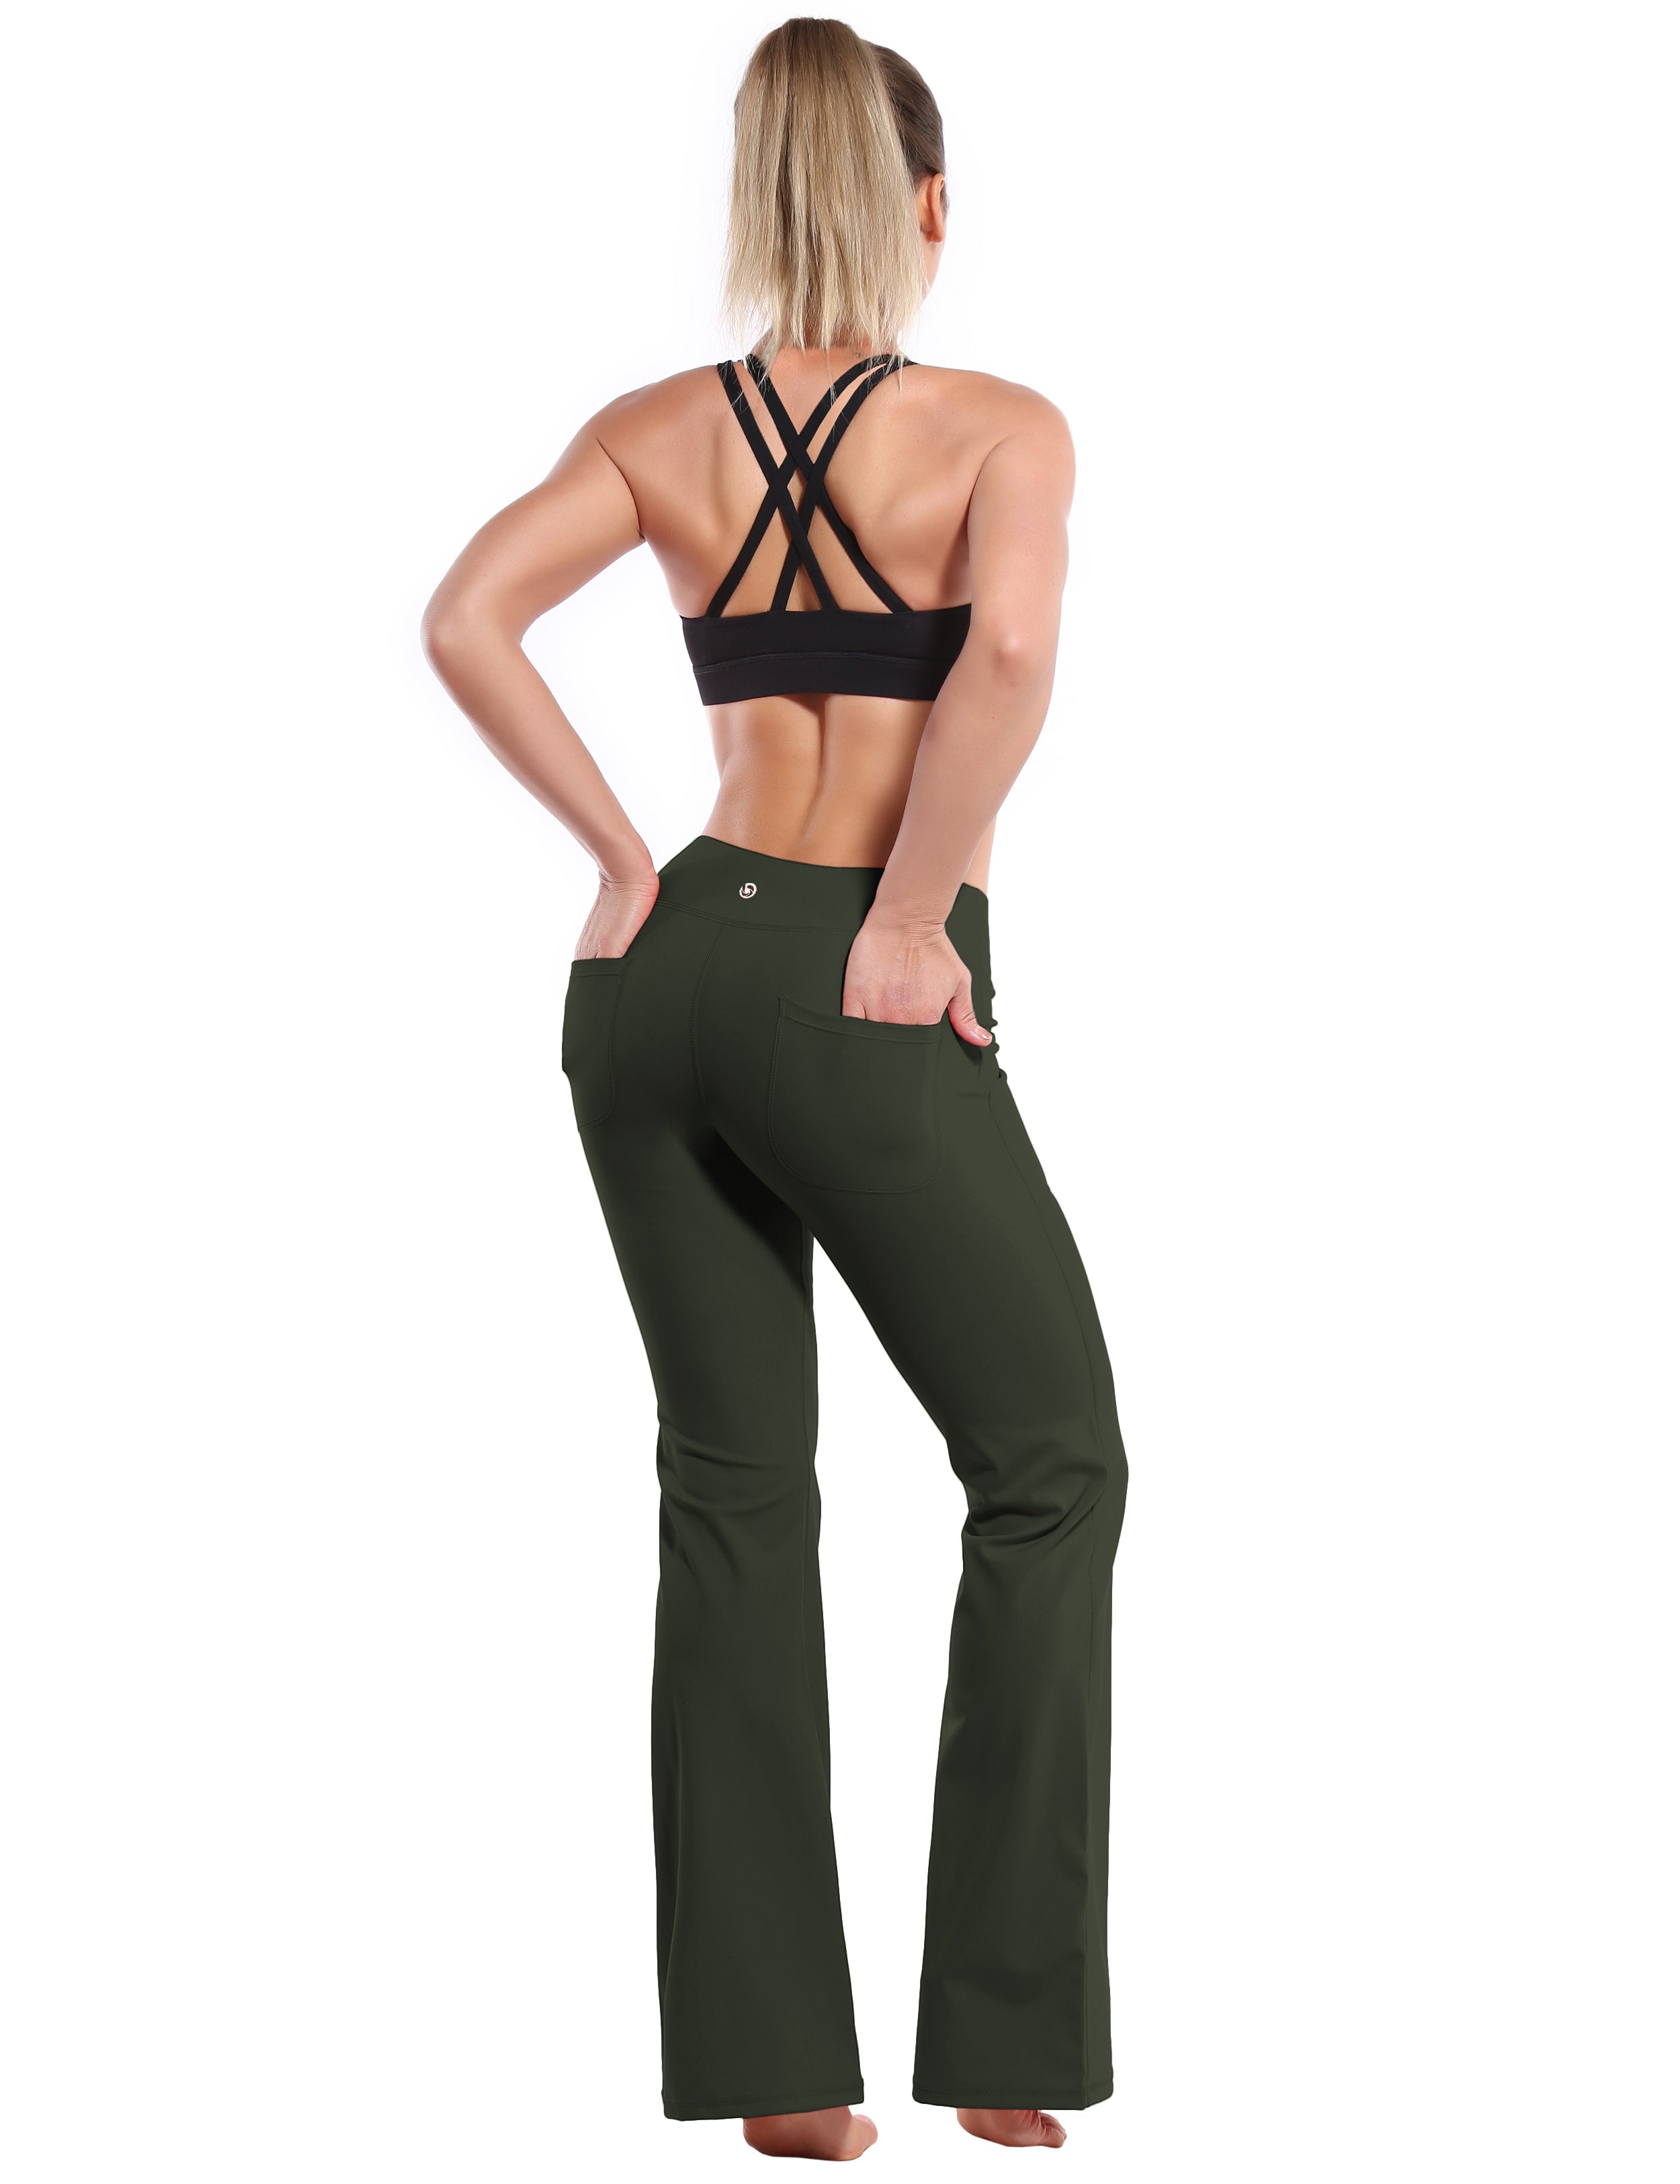 4 Pockets Bootcut Leggings olivegray 75%Nylon/25%Spandex Fabric doesn't attract lint easily 4-way stretch No see-through Moisture-wicking Inner pocket Four lengths